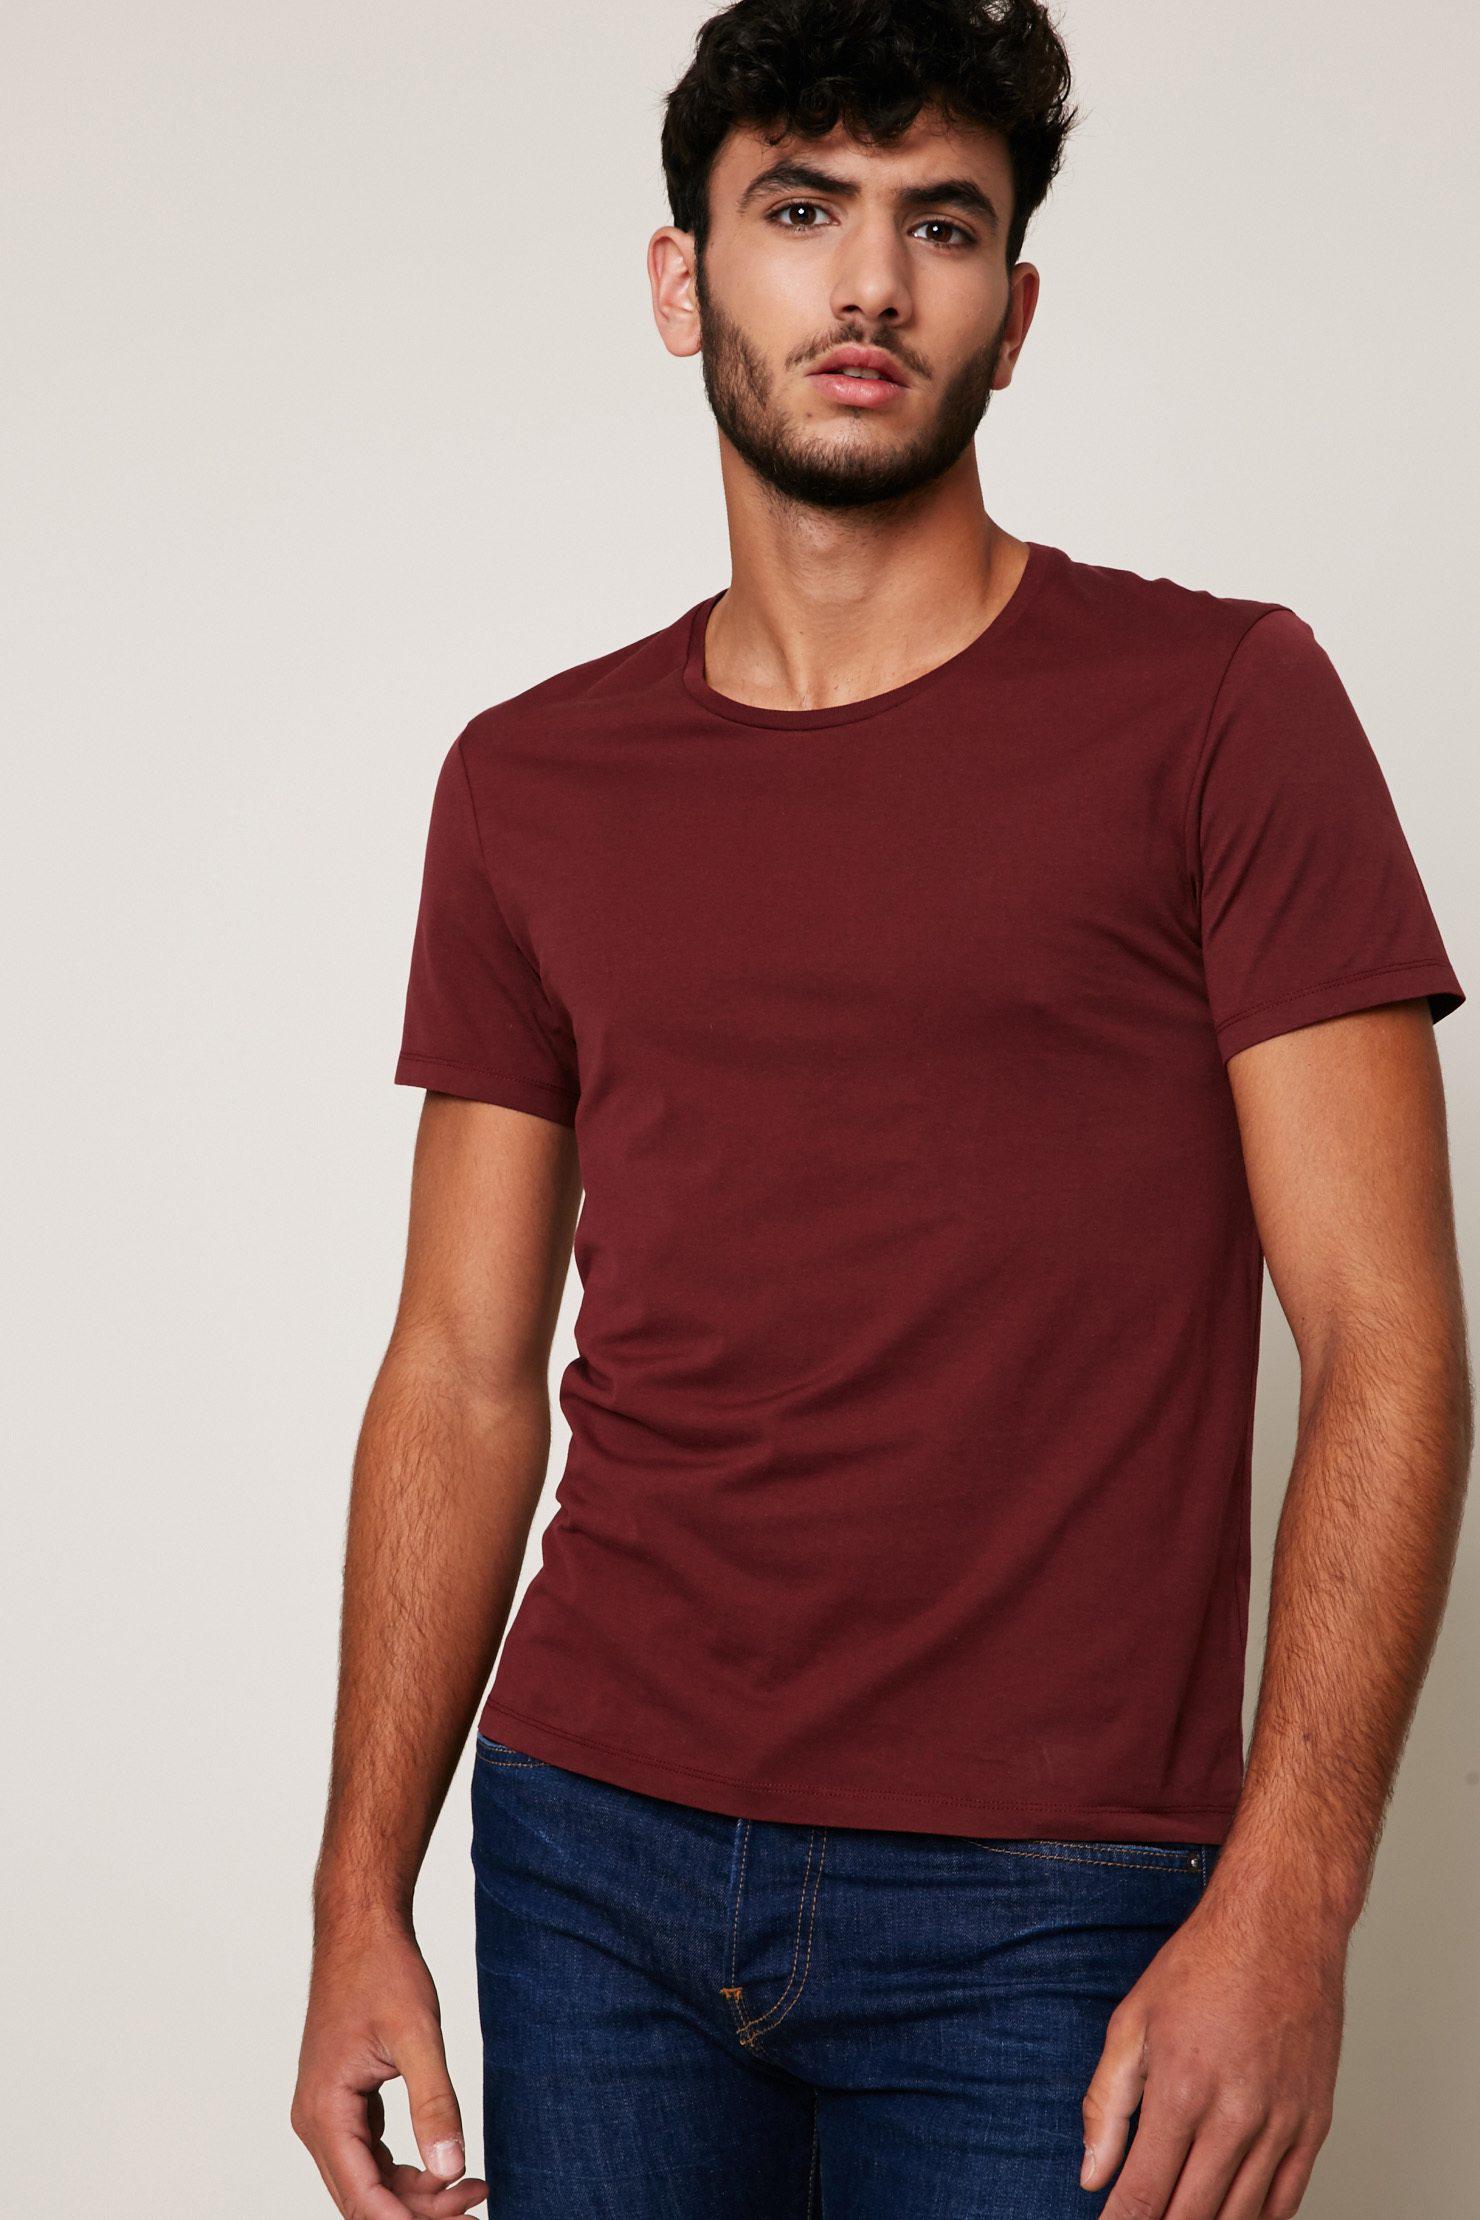 Lyst - American Vintage T-shirt in Red for Men